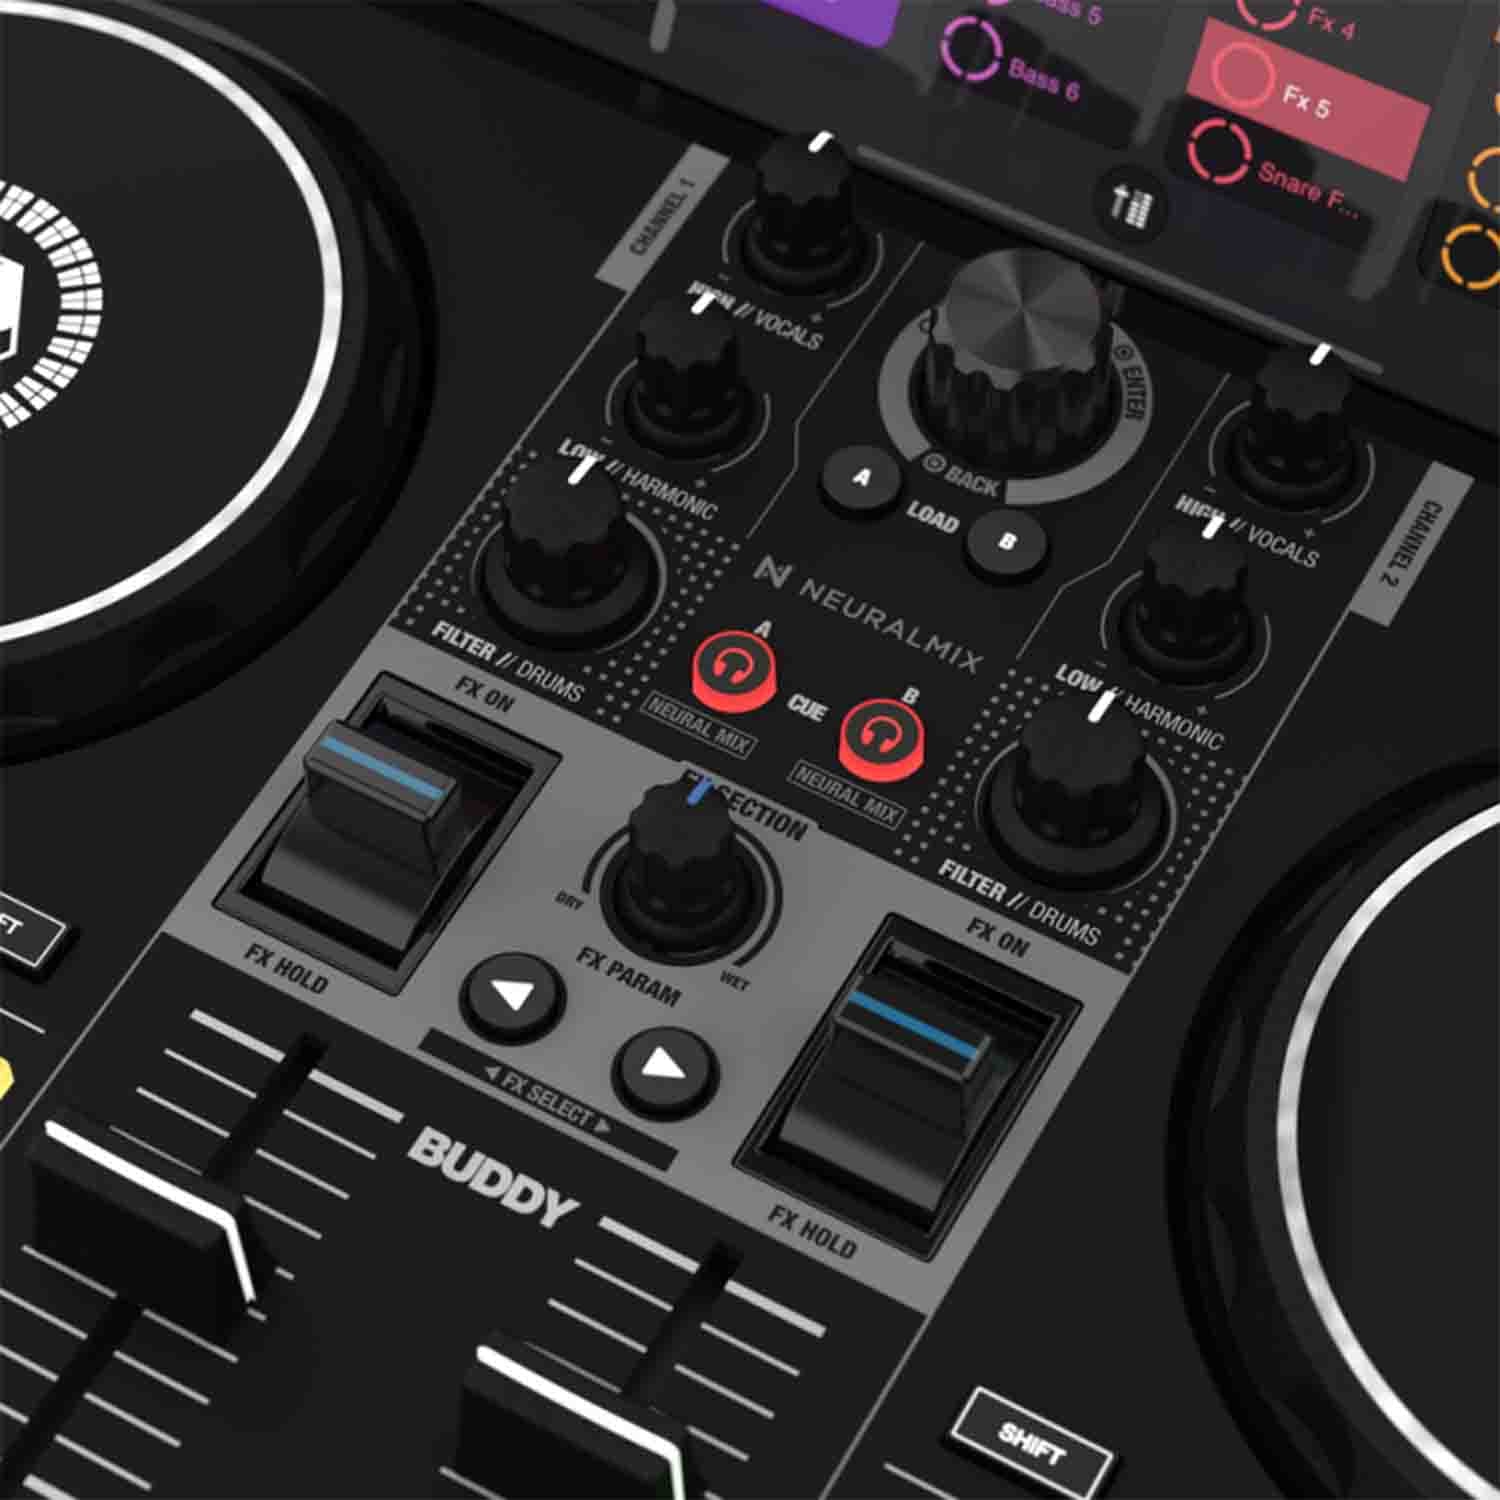 Reloop BUDDY Compact 2-Channel DJ Controller for iOS/iPAD, Android Mac and Pc - Hollywood DJ